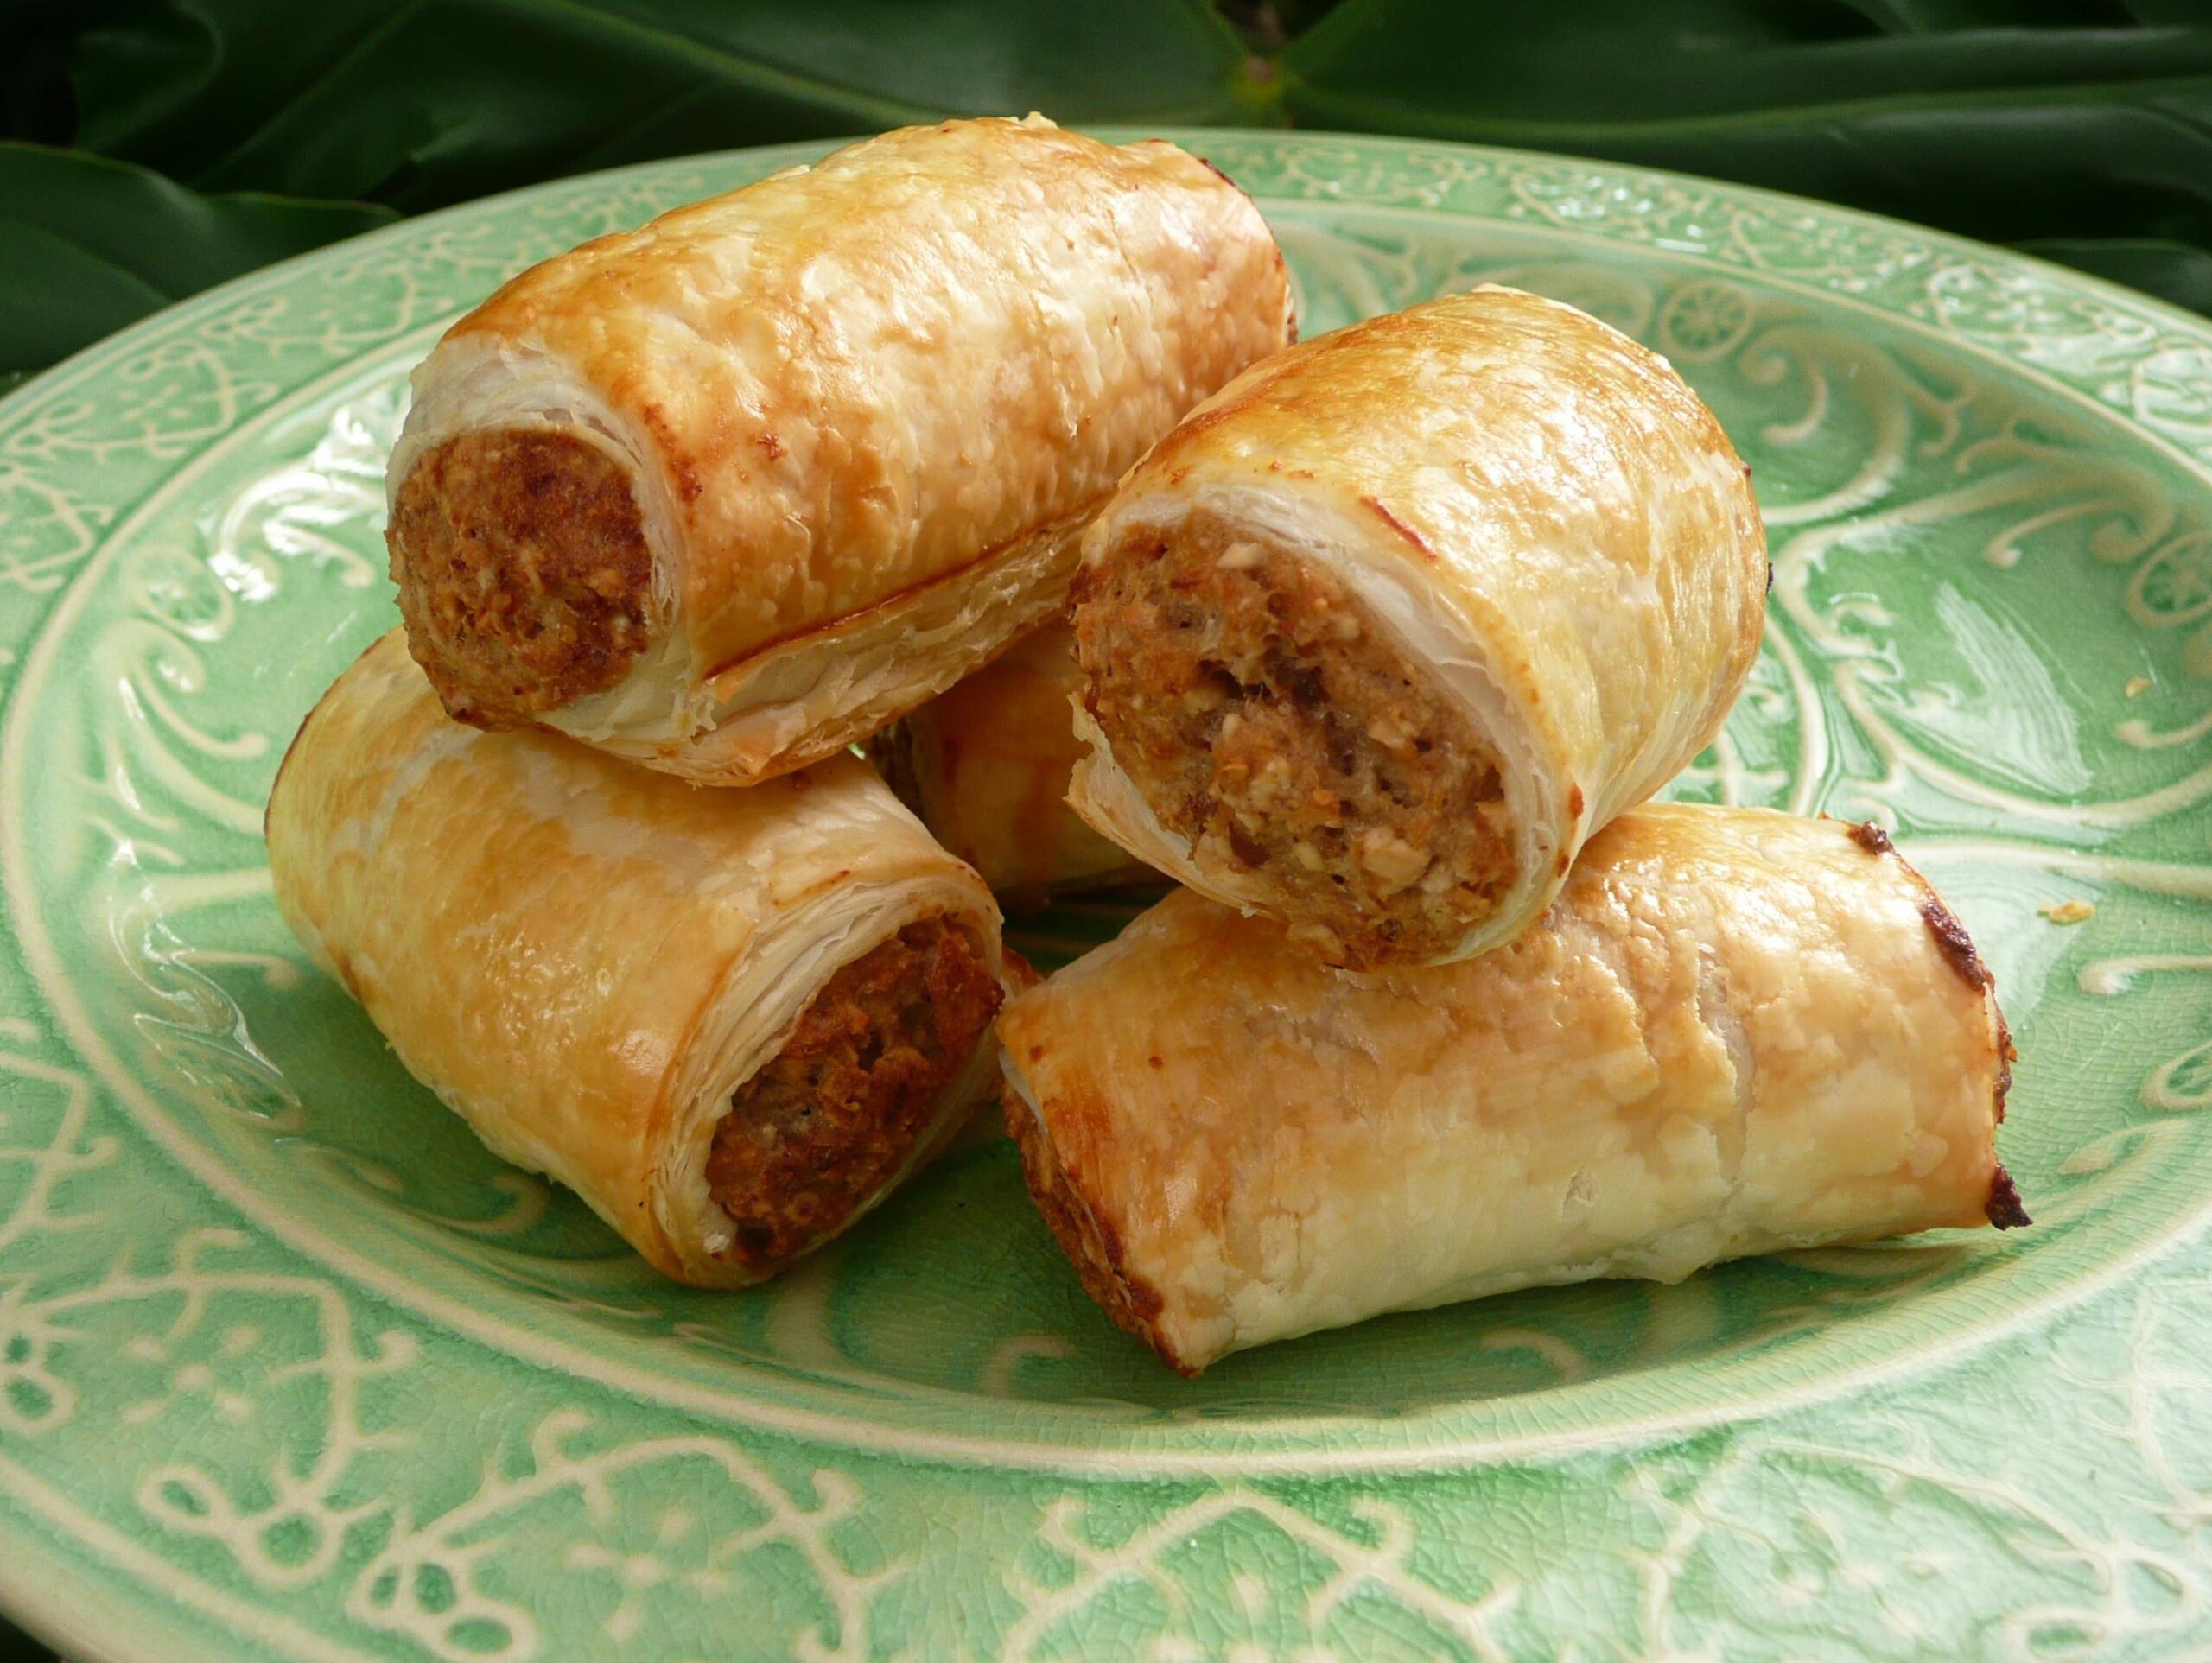 Delicious vegetarian sausage rolls for a guilt-free snack